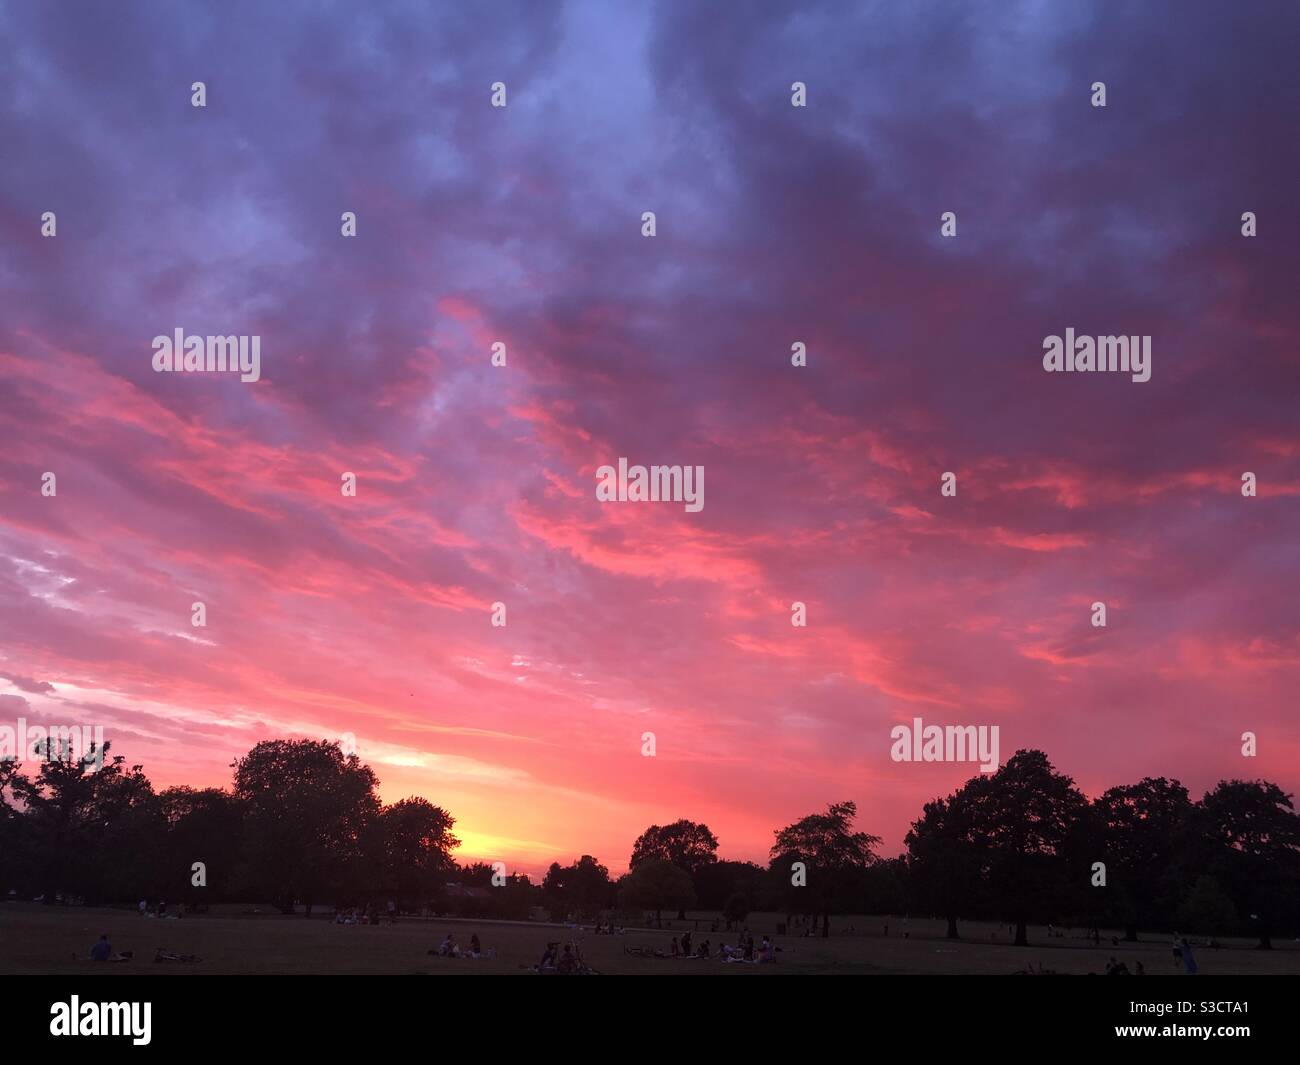 Pink sky at night, Dulwich Park, London Stock Photo